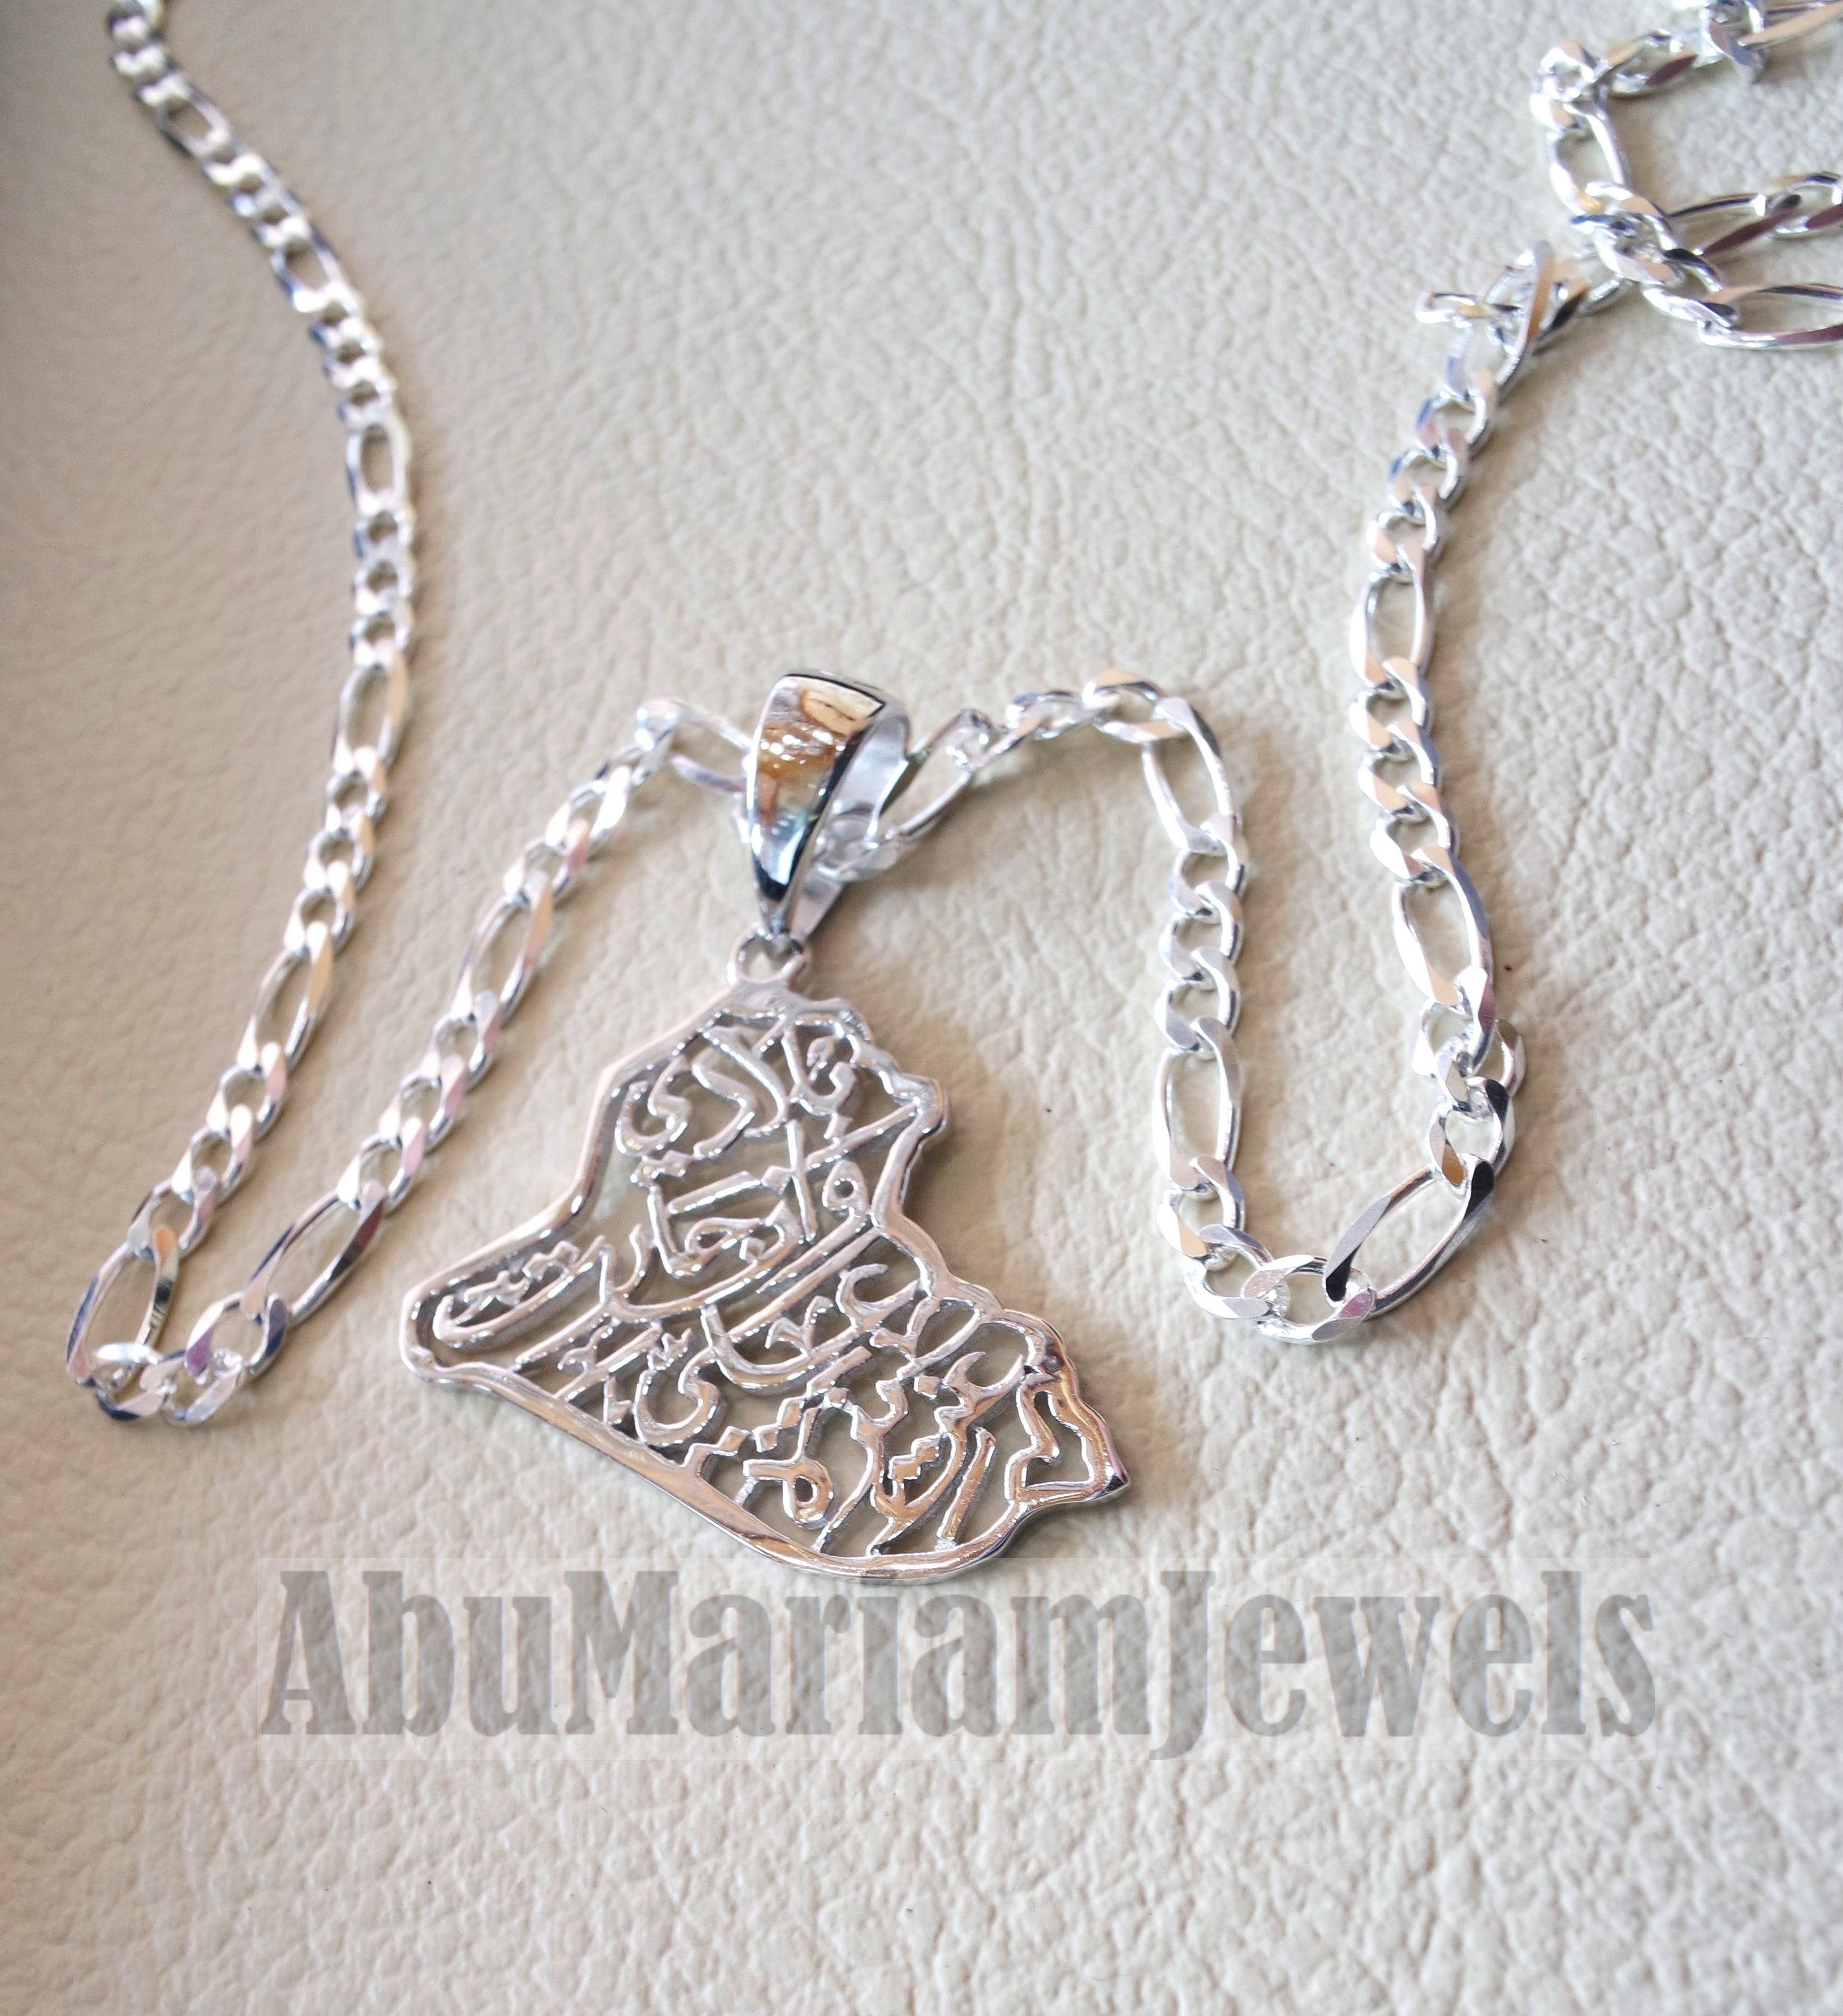 Iraq frame map pendant and thick chain with famous poem verse sterling silver 925 k high quality jewelry arabic fast shipping خارطة العراق